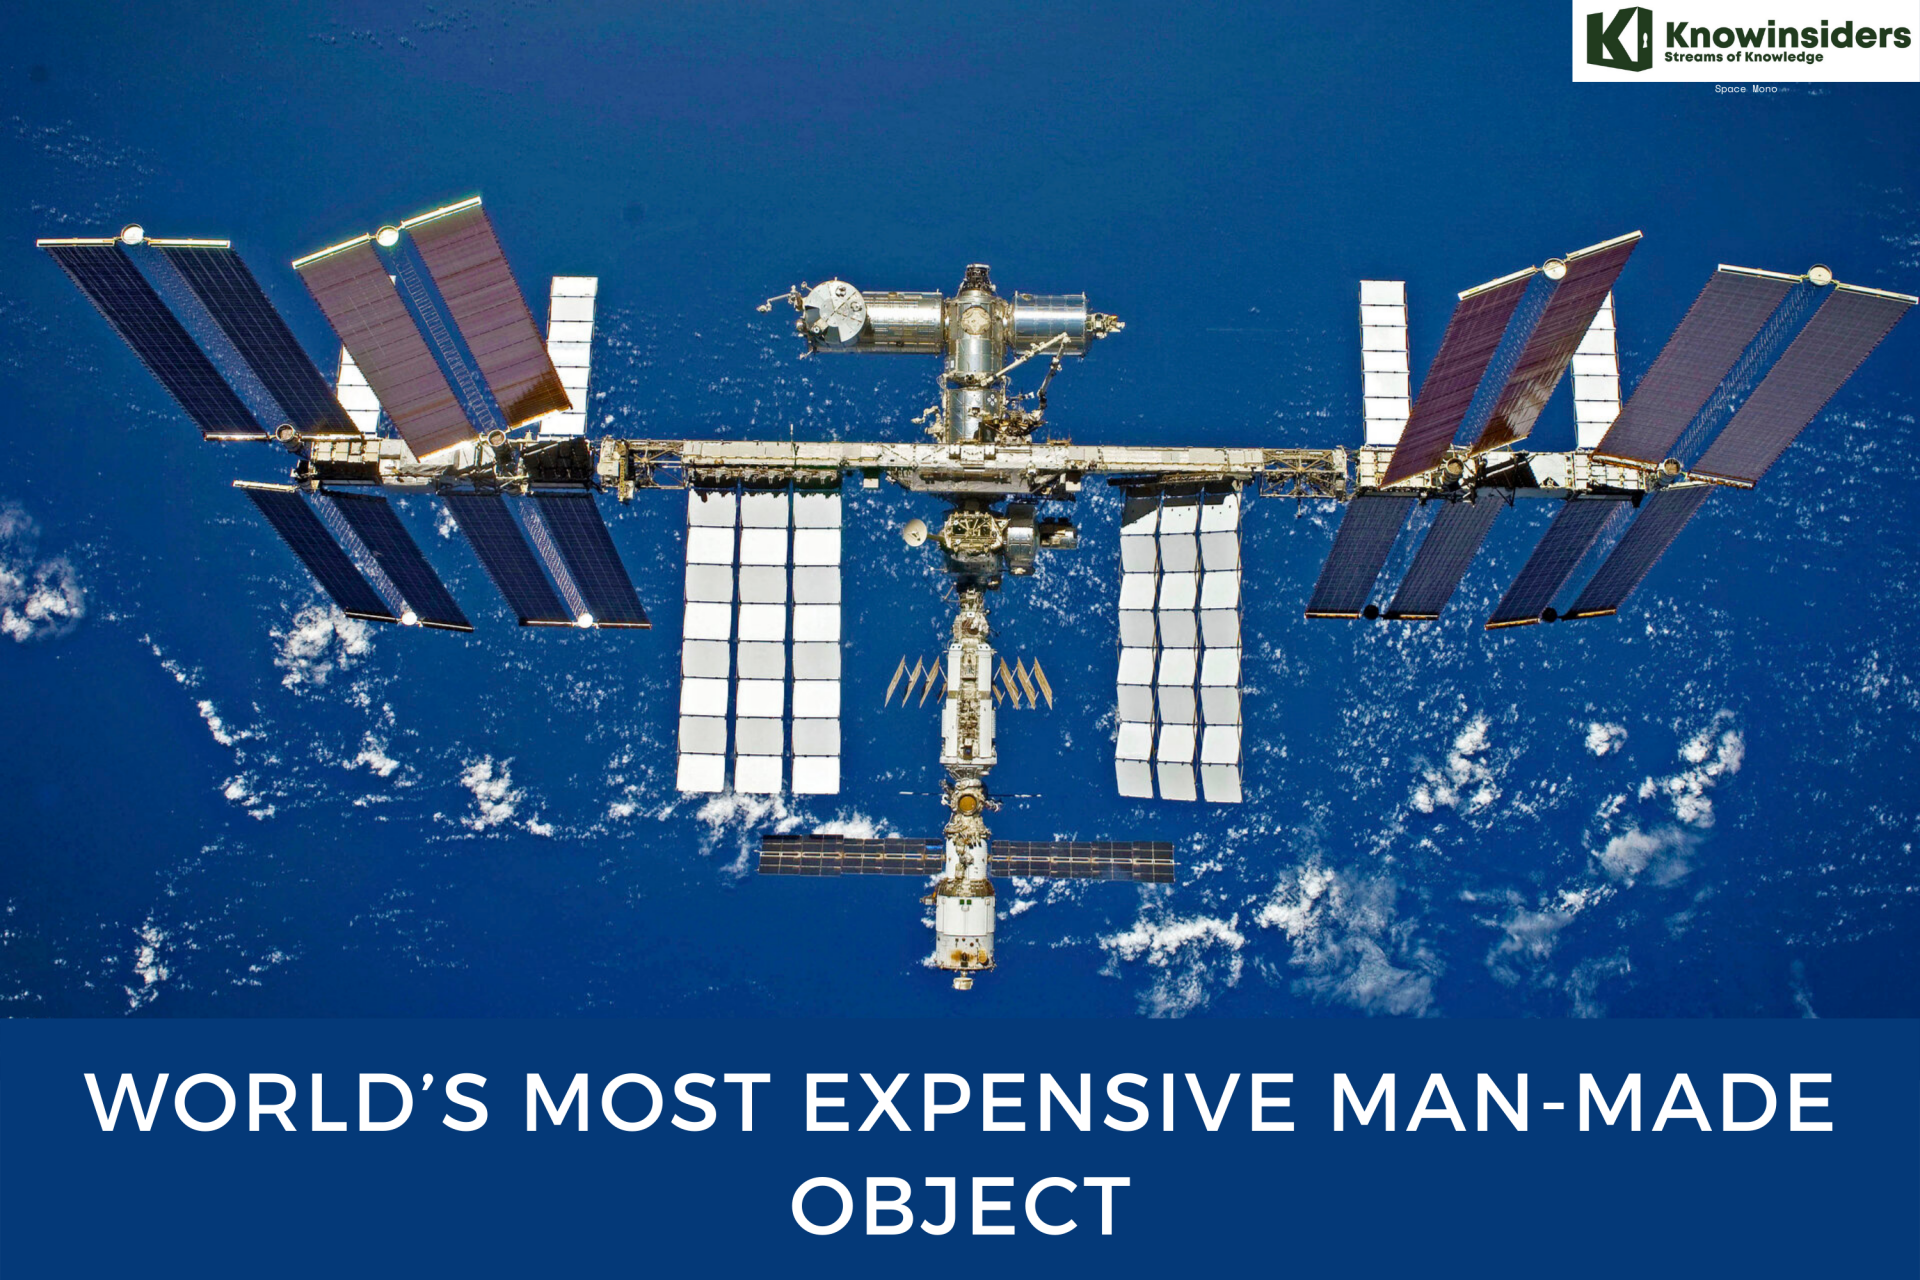 What Is The Most Expensive Man-Made Object In The World?